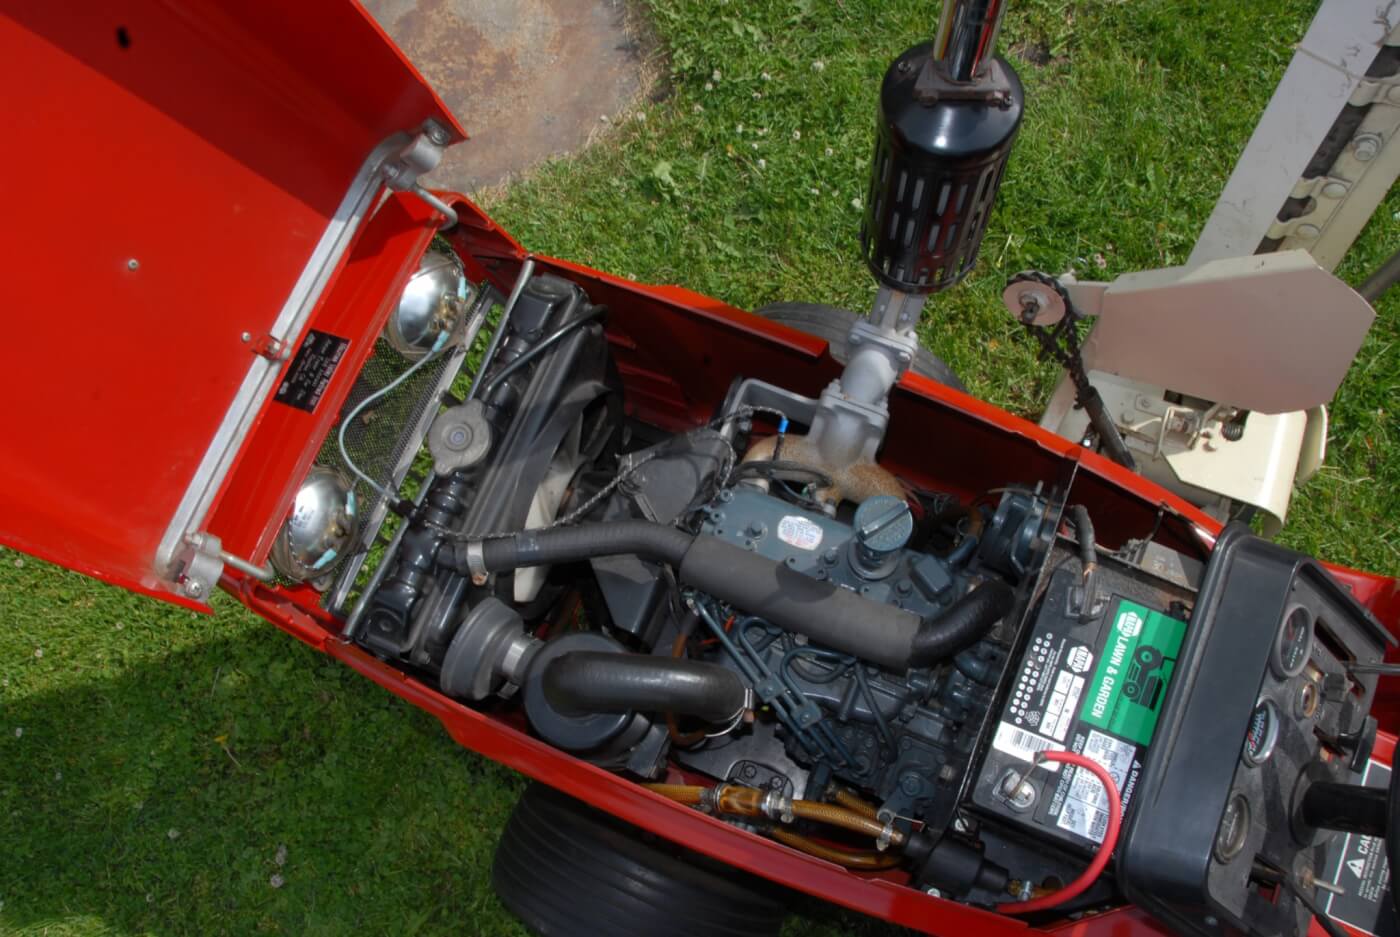 It’s small, but it's a real diesel! The water cooled Kubota D-600B is a tiny three-cylinder natural-aspirated indirect-injected engine that can make up to 15 intermittent horsepower at 3,600 rpm. It displaces almost 37 cubic inches and uses a Bosch MD mini-pump with Bosch throttle type injectors that open at 1,991 psi. The pump is fed at 7 psi from a 4-gallon tank via an electric pump. The crankshaft is supported by four main bearings and the cylinders are dry sleeved in the iron block. The engine assembly, including the radiator and fan, weighs 136 lbs. The only downside to the installation is that the lawn and garden-sized battery may not always be up to spinning the 23:1 CR diesel in cold weather; a block heater was optional and probably necessary when using the 782D for winter work.